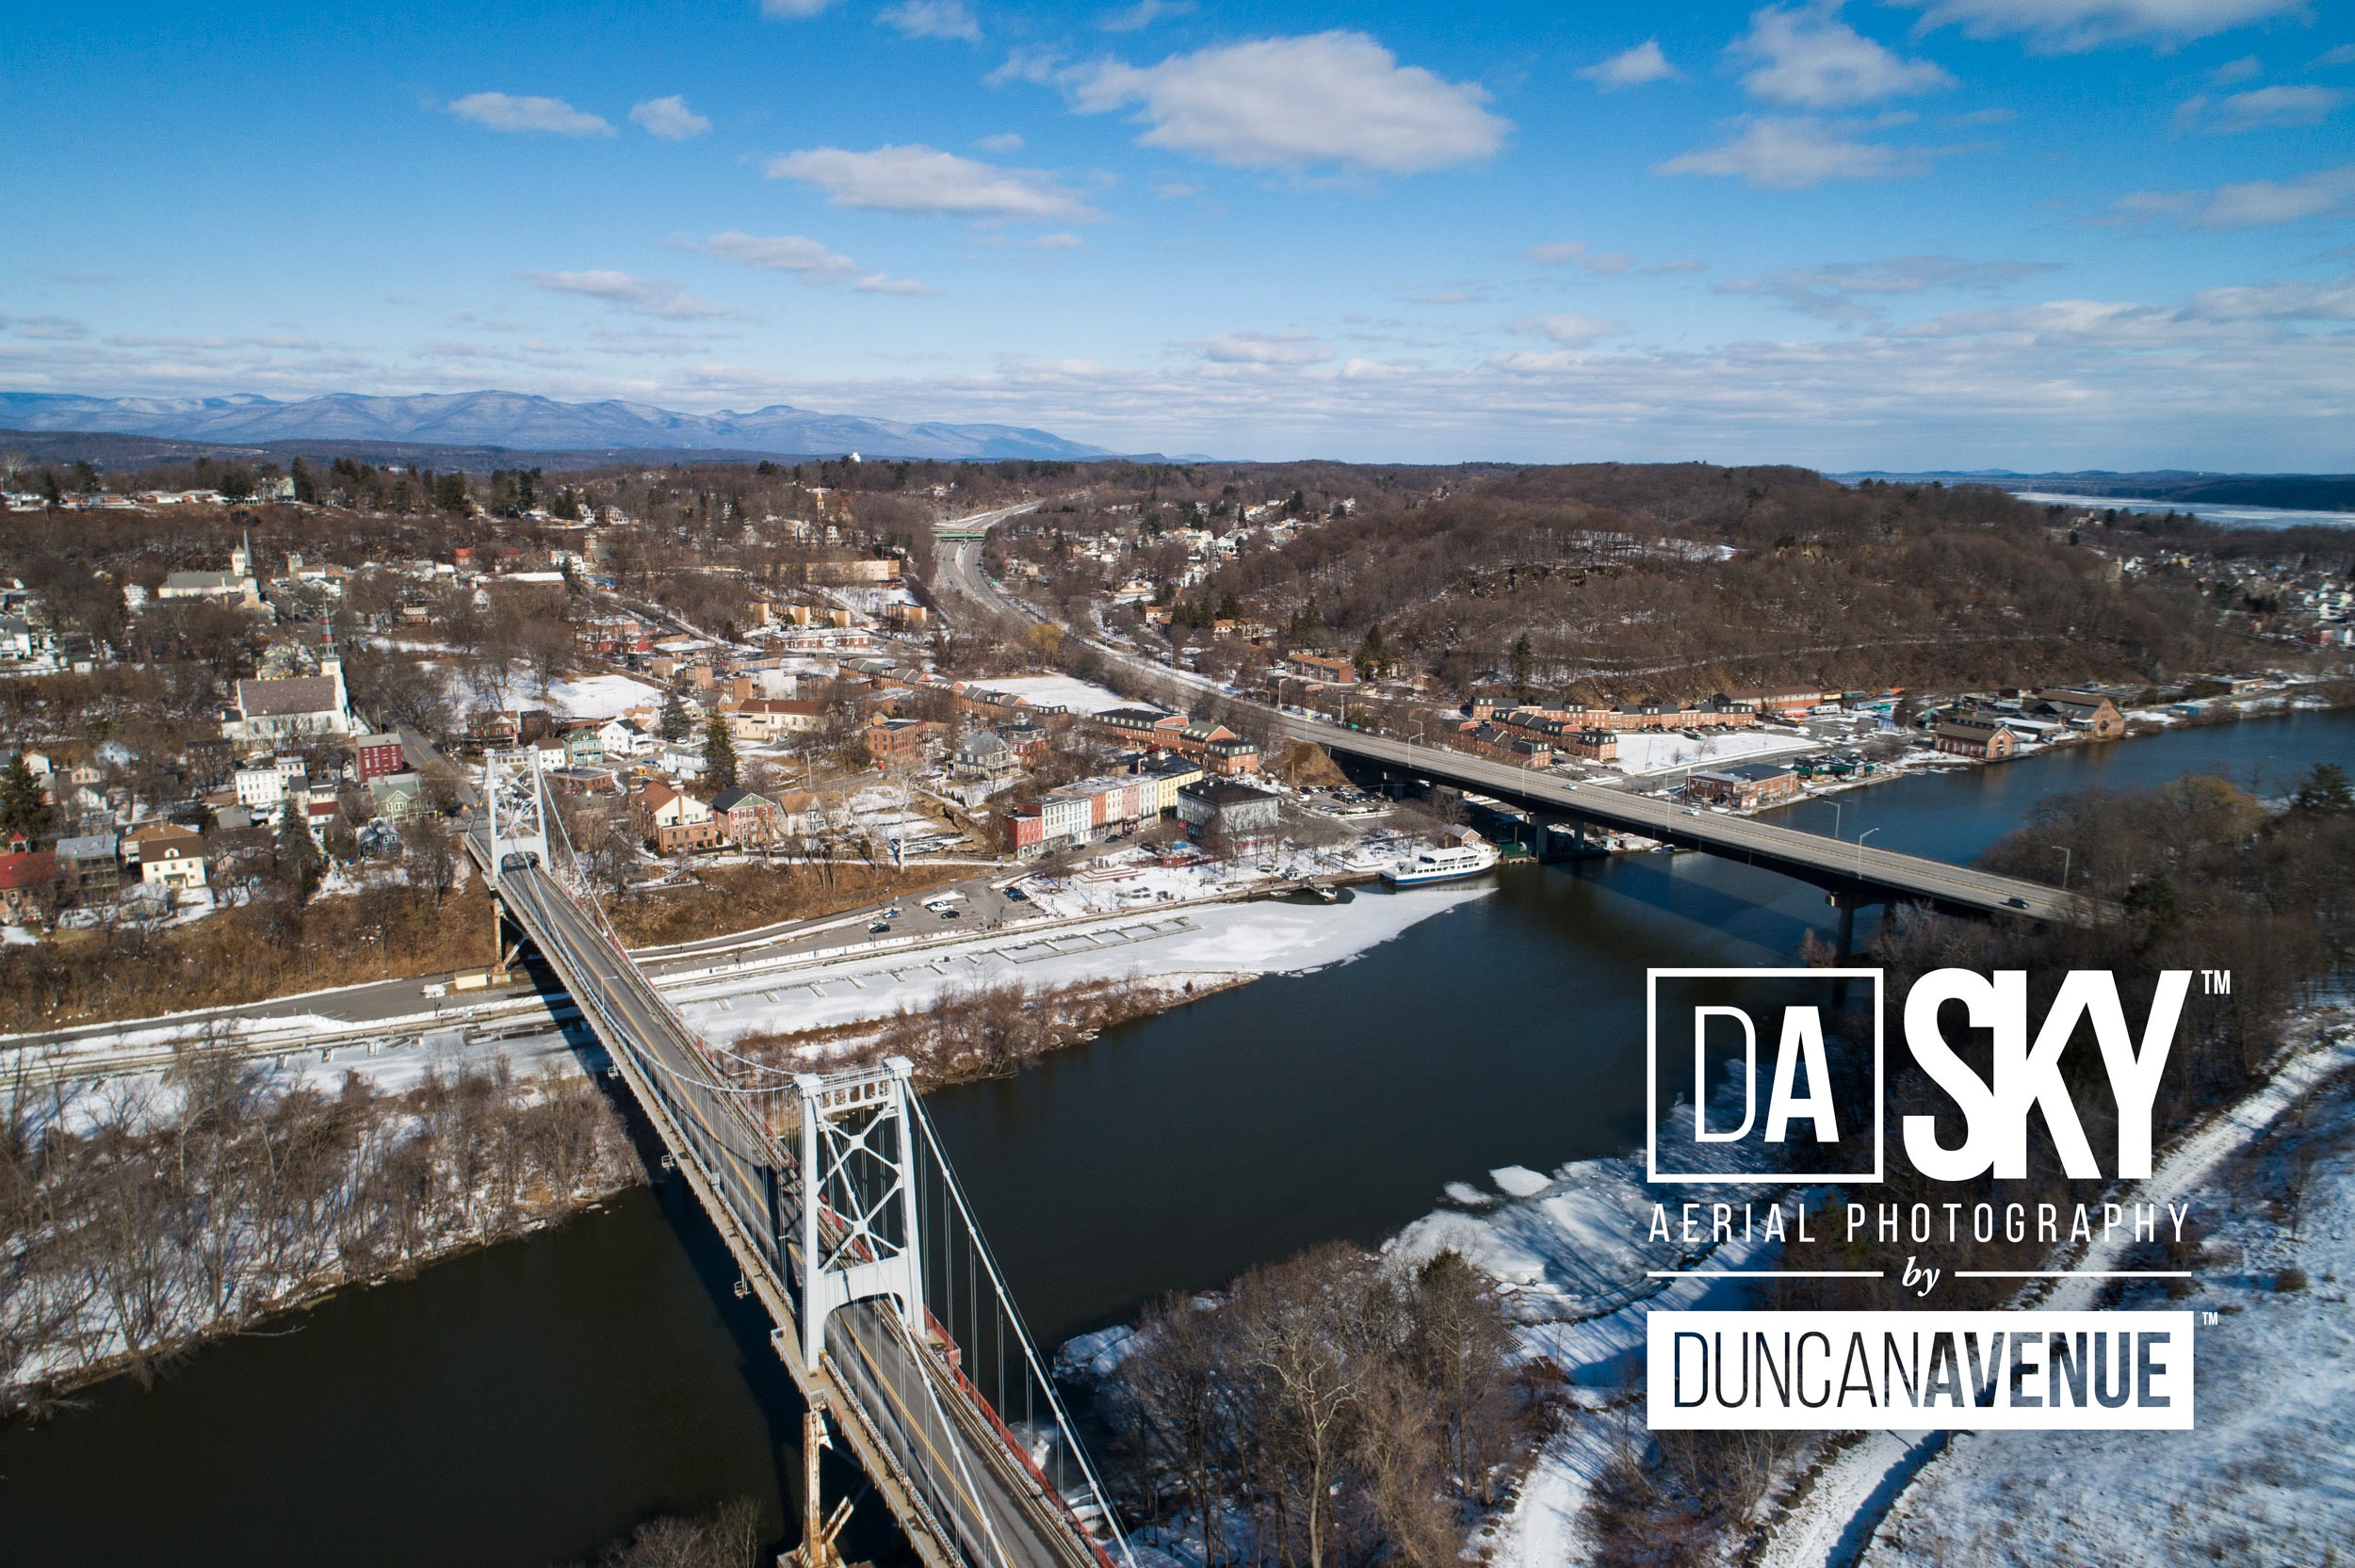 Flying above Kingston – Hudson Valley Aerial Photo Story by Maxwell Alexander